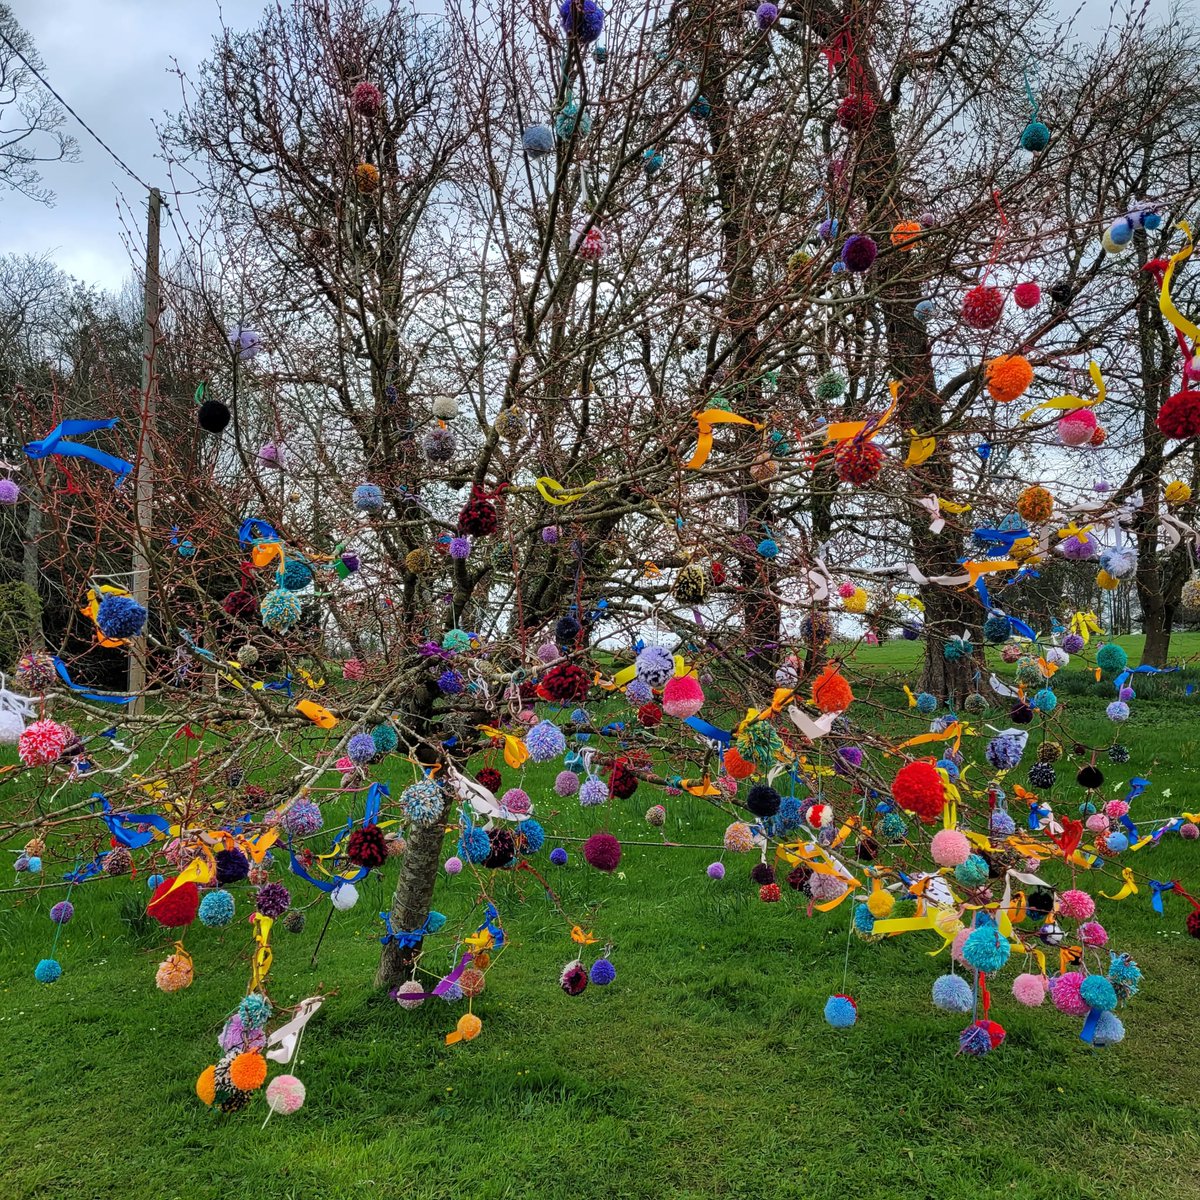 Thanks all who made Easter so special: Kingswood WI for donating decorations and helping install them; Liz Dix for her beautiful hanging creations, and staff & volunteers, who made hundreds of #pompoms! #EasterAdventures #NationalTrust #yarnbombing